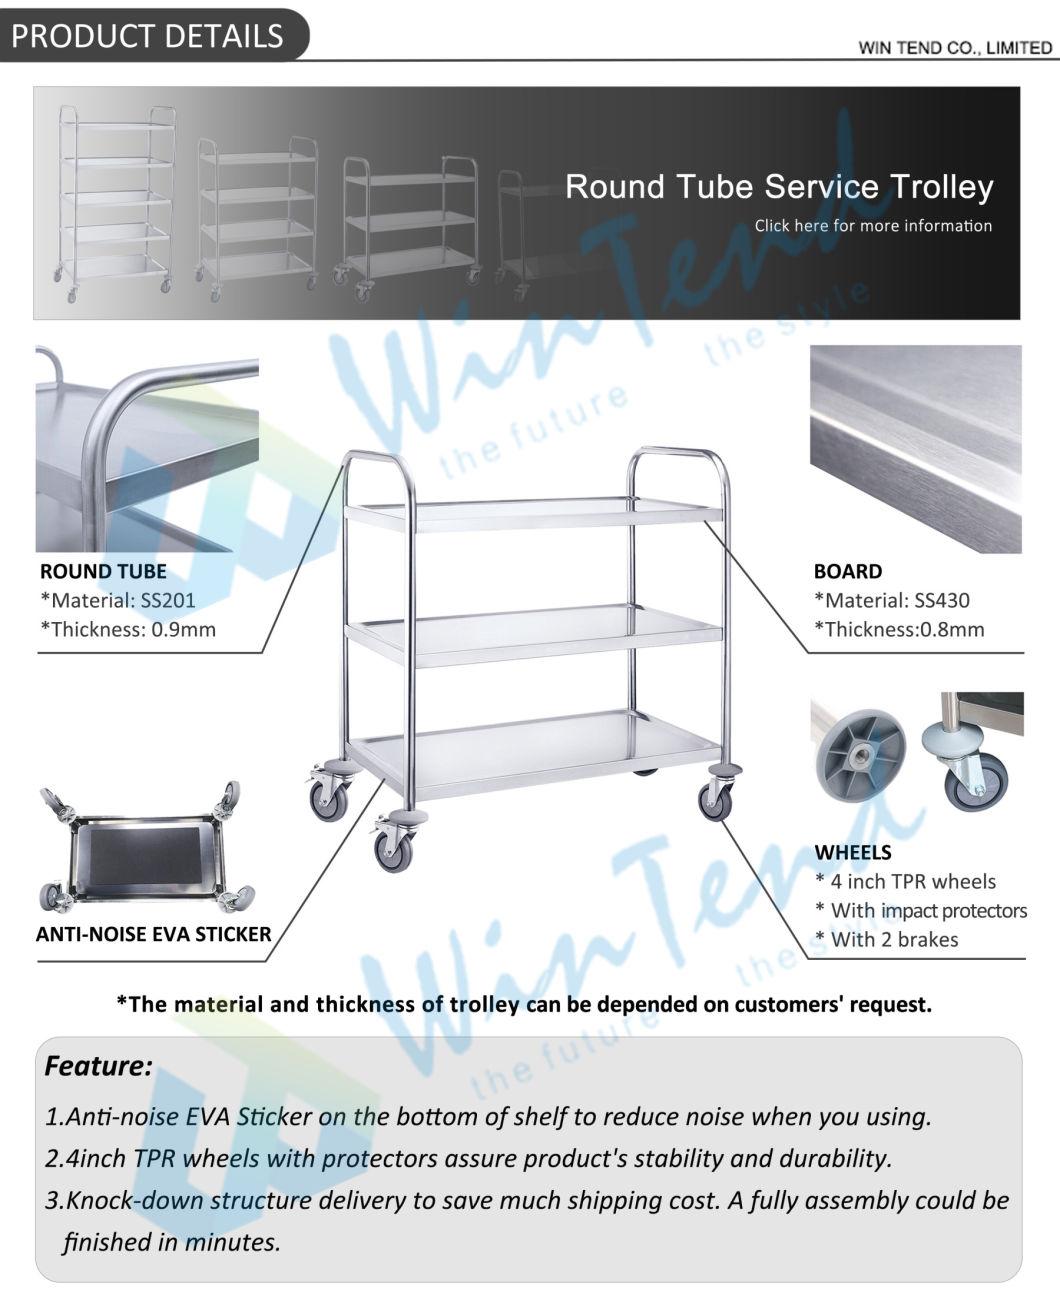 Kitchen Equipment 3 Tiers Water Transfer Printing Service Trolley